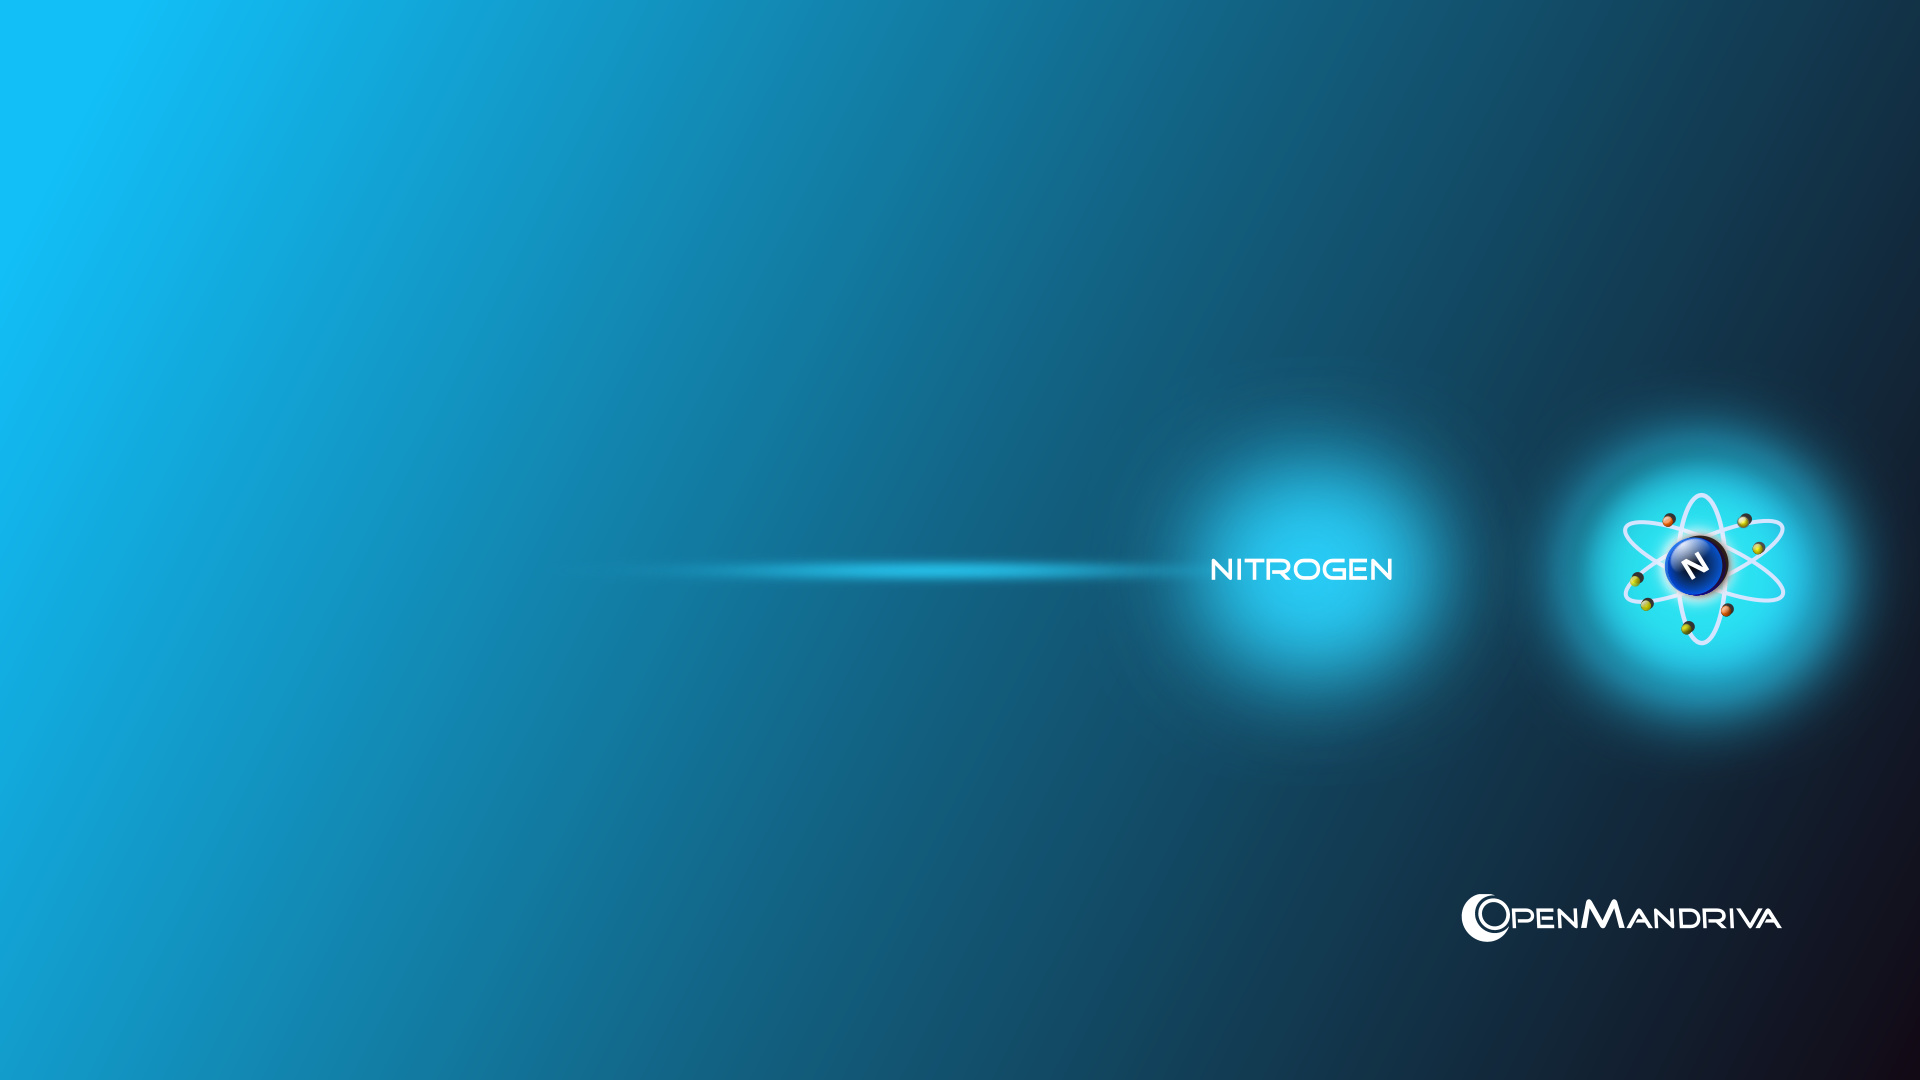 Nitrogen Is A Fast And Lightweight Wallpaper Utility - YouTube